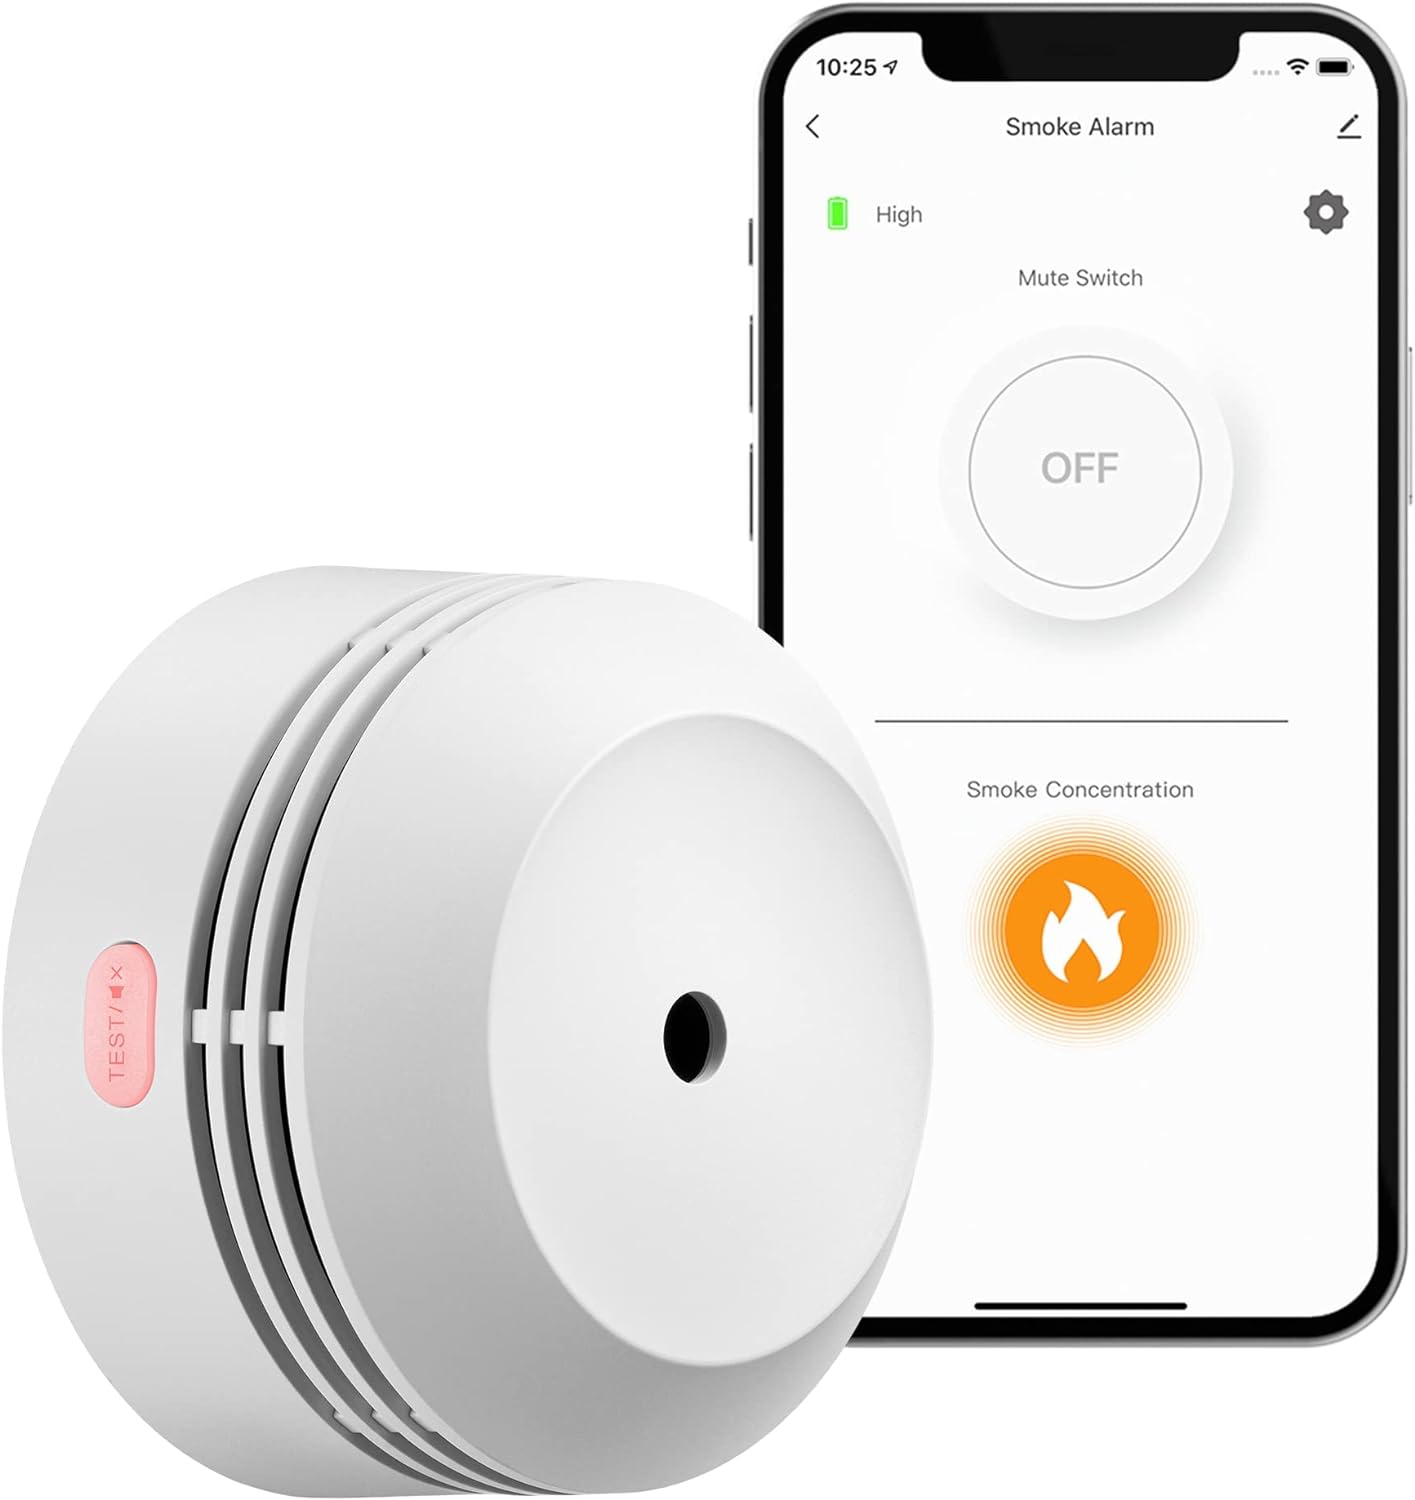 The smart smoke detector is compatible with TuyaSmart and Smart Life apps